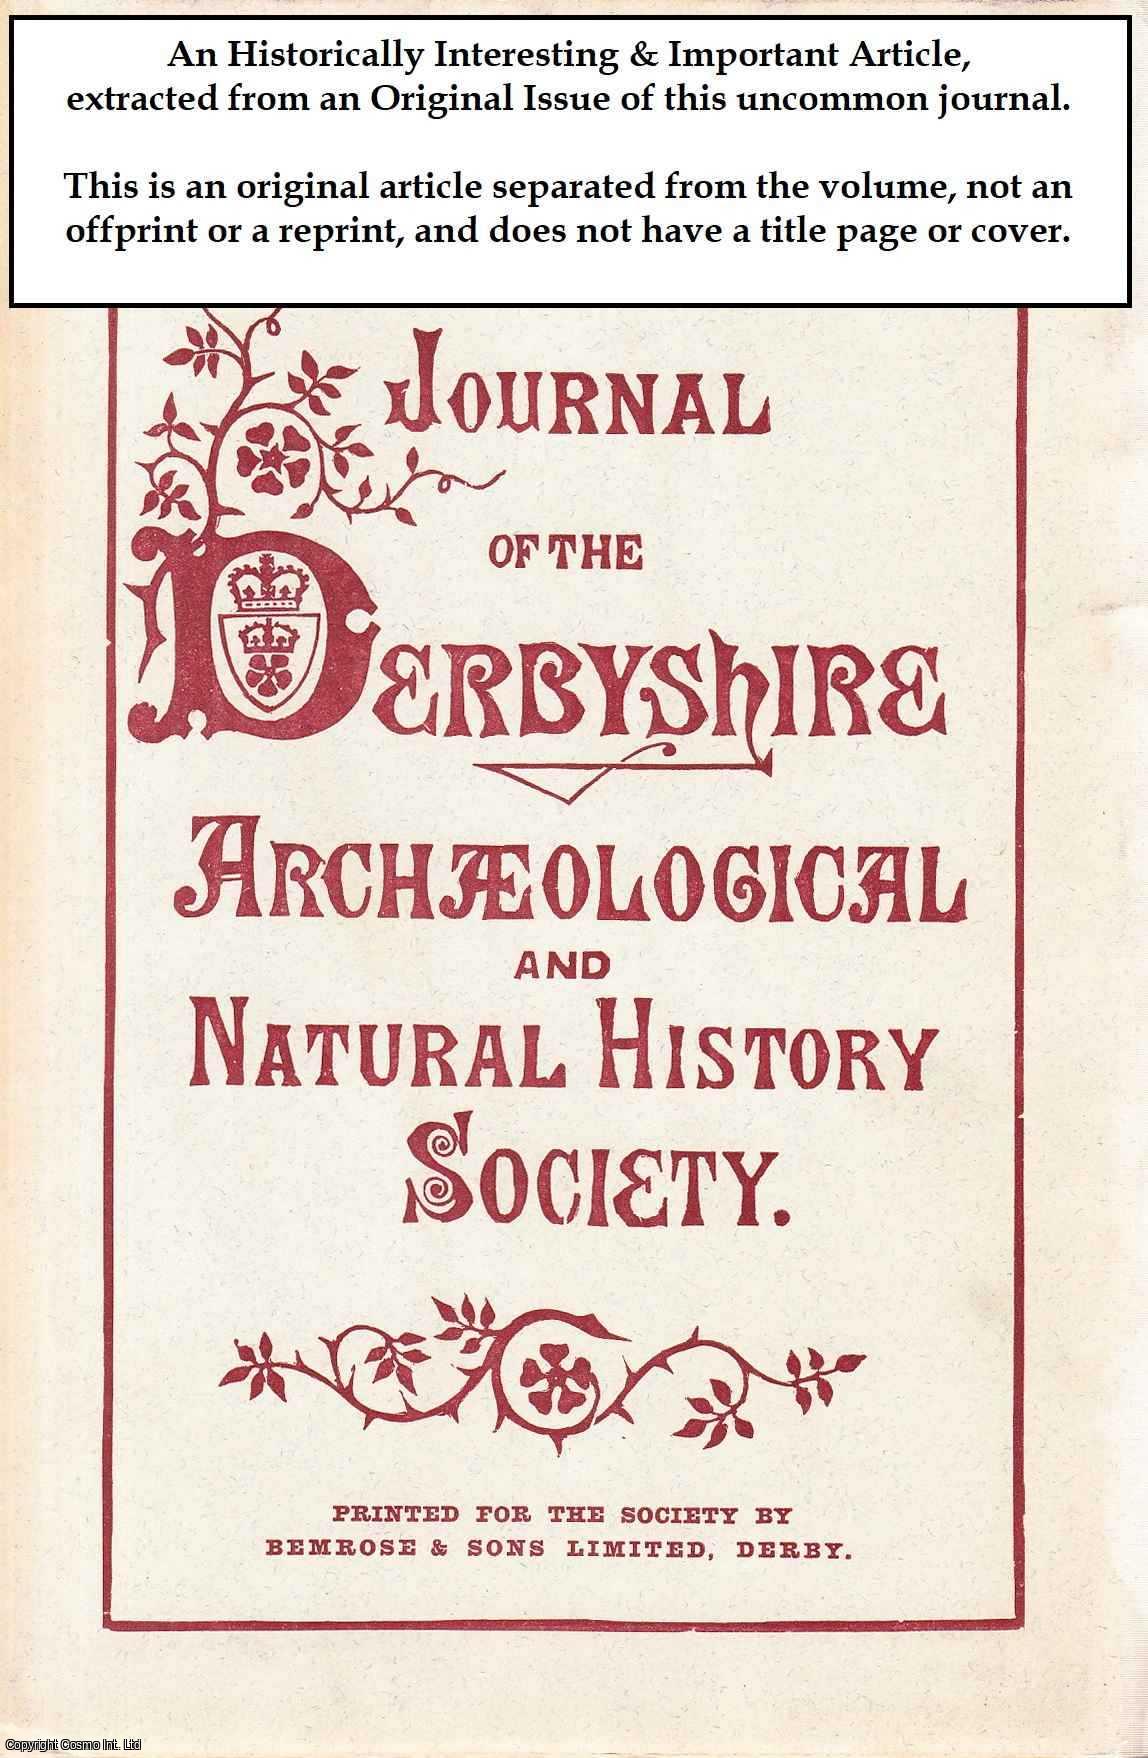 L. M. Solon - Some Fragments of English Earthenware Lately Discovered at Derby. An original article from the Journal of the Derbyshire Archaeological & Natural History Society, 1887.